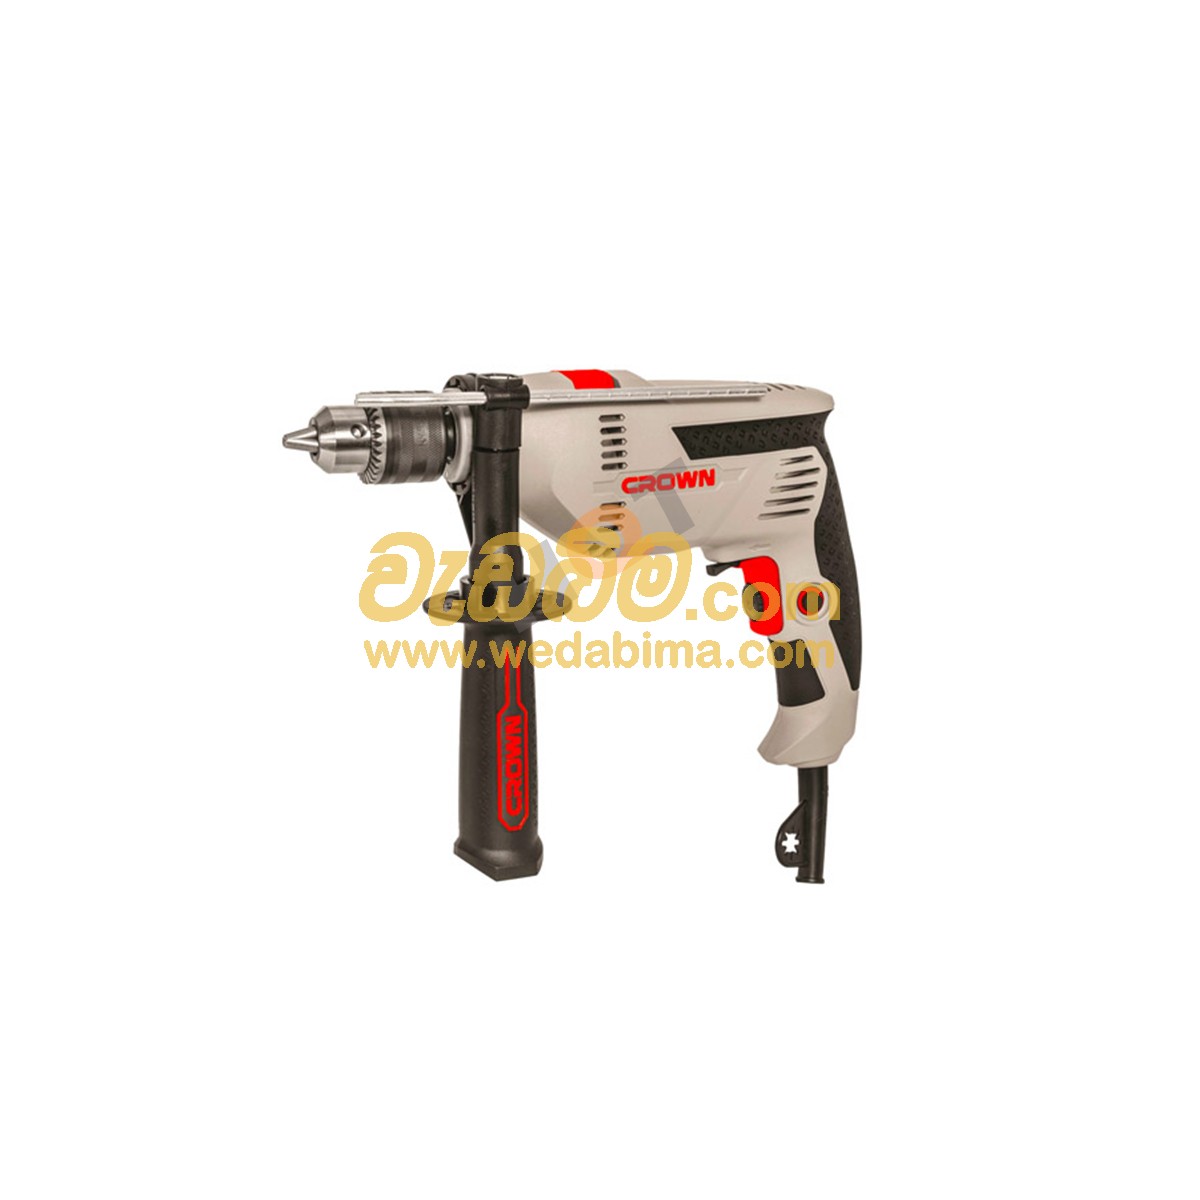 CROWN Impact Drill 600W 13MM